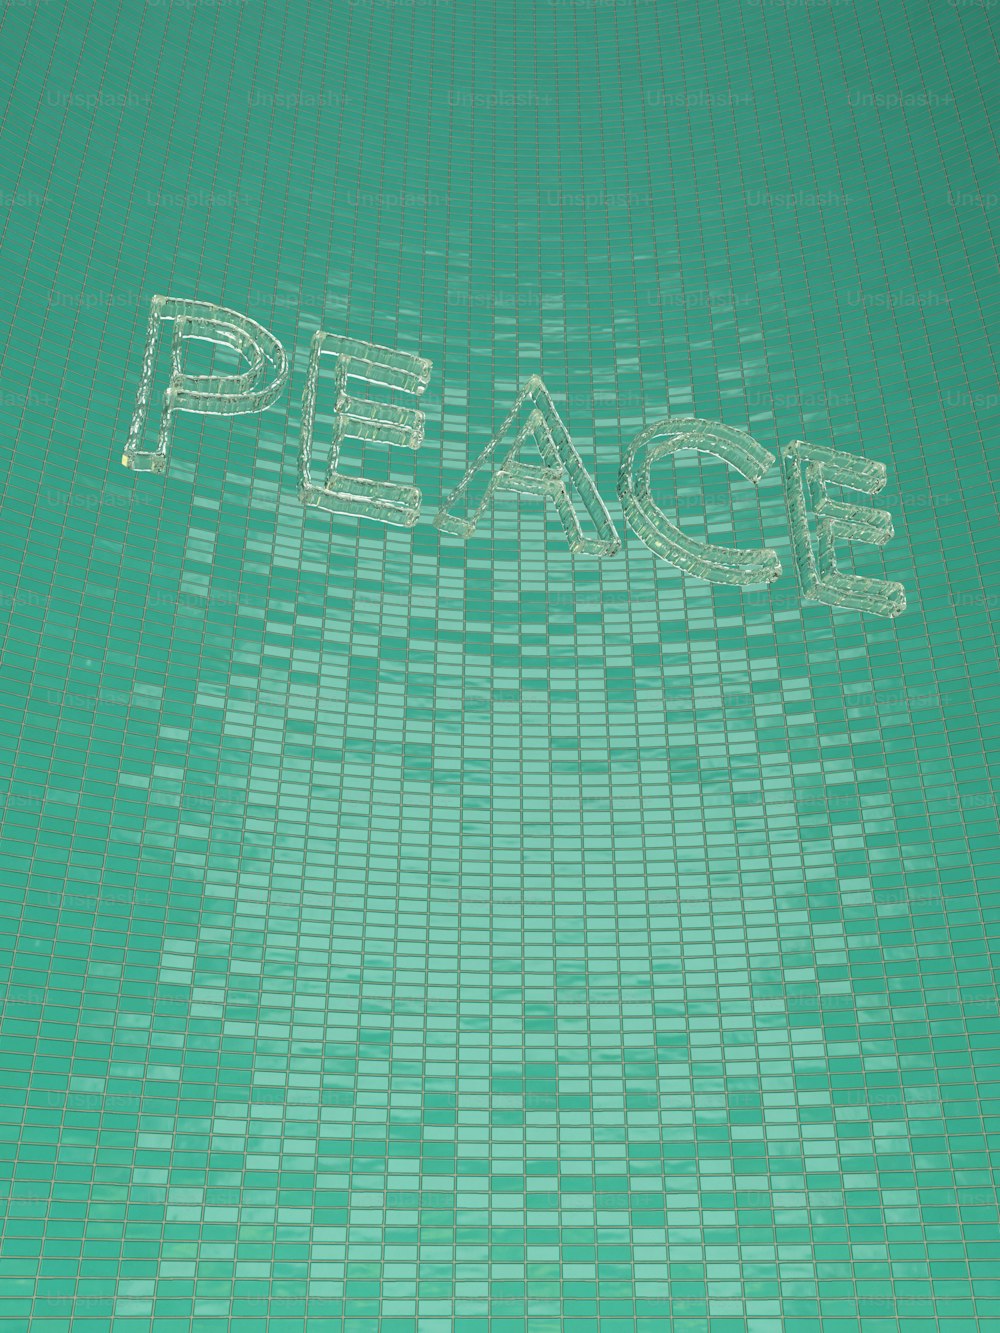 a surfboard with the word peace written on it